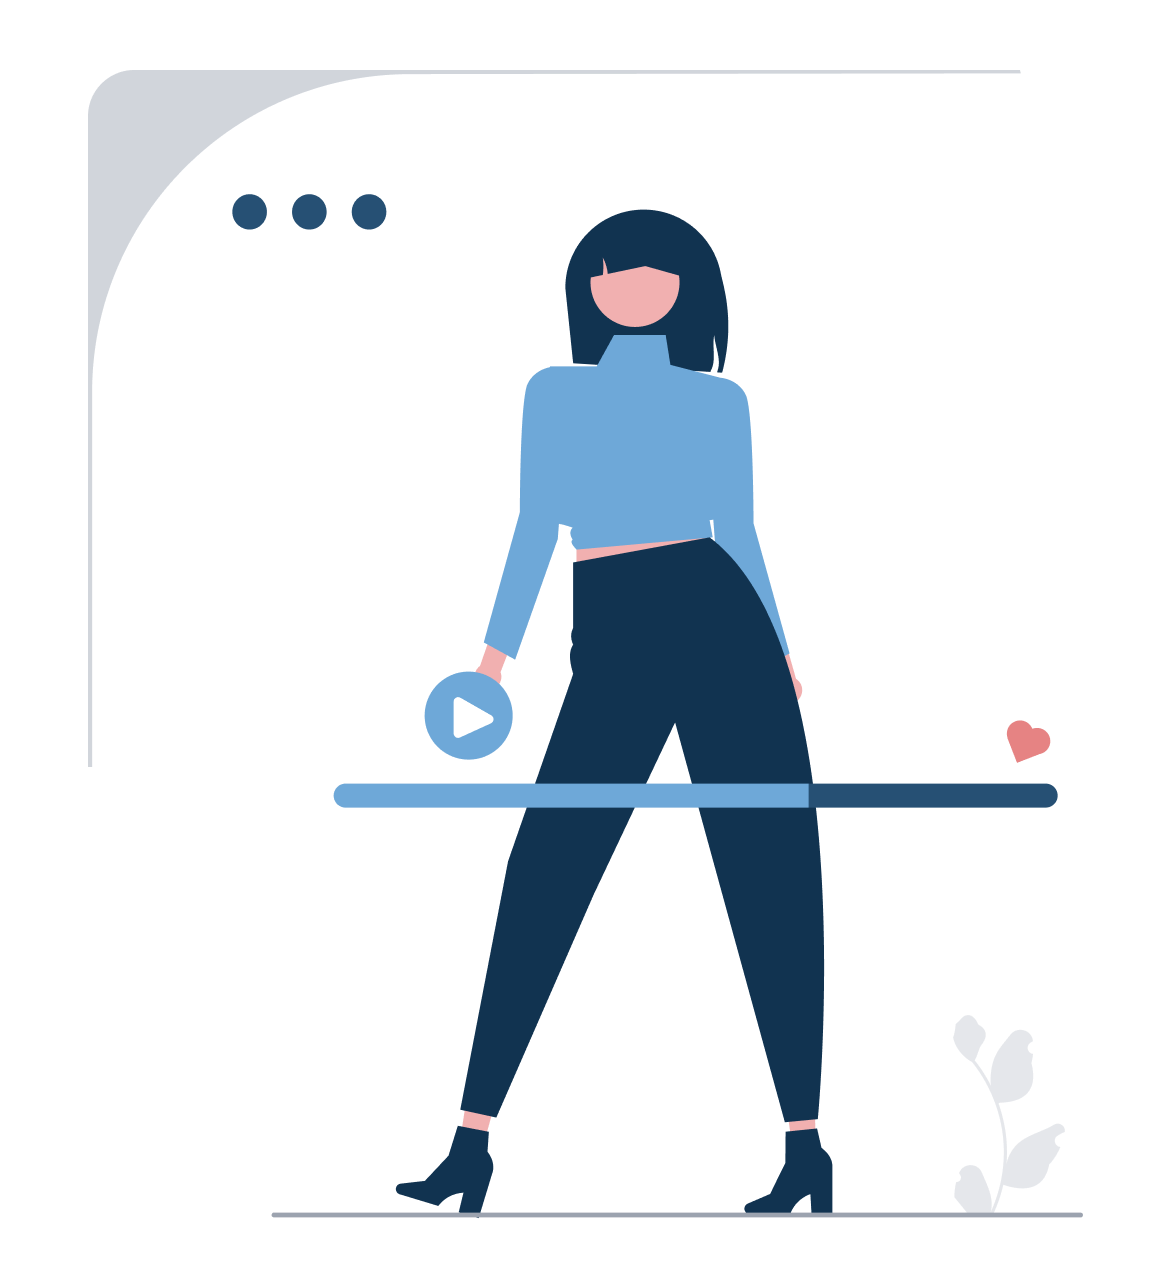 Illustration of a figure of a woman standing within the interface of a video player